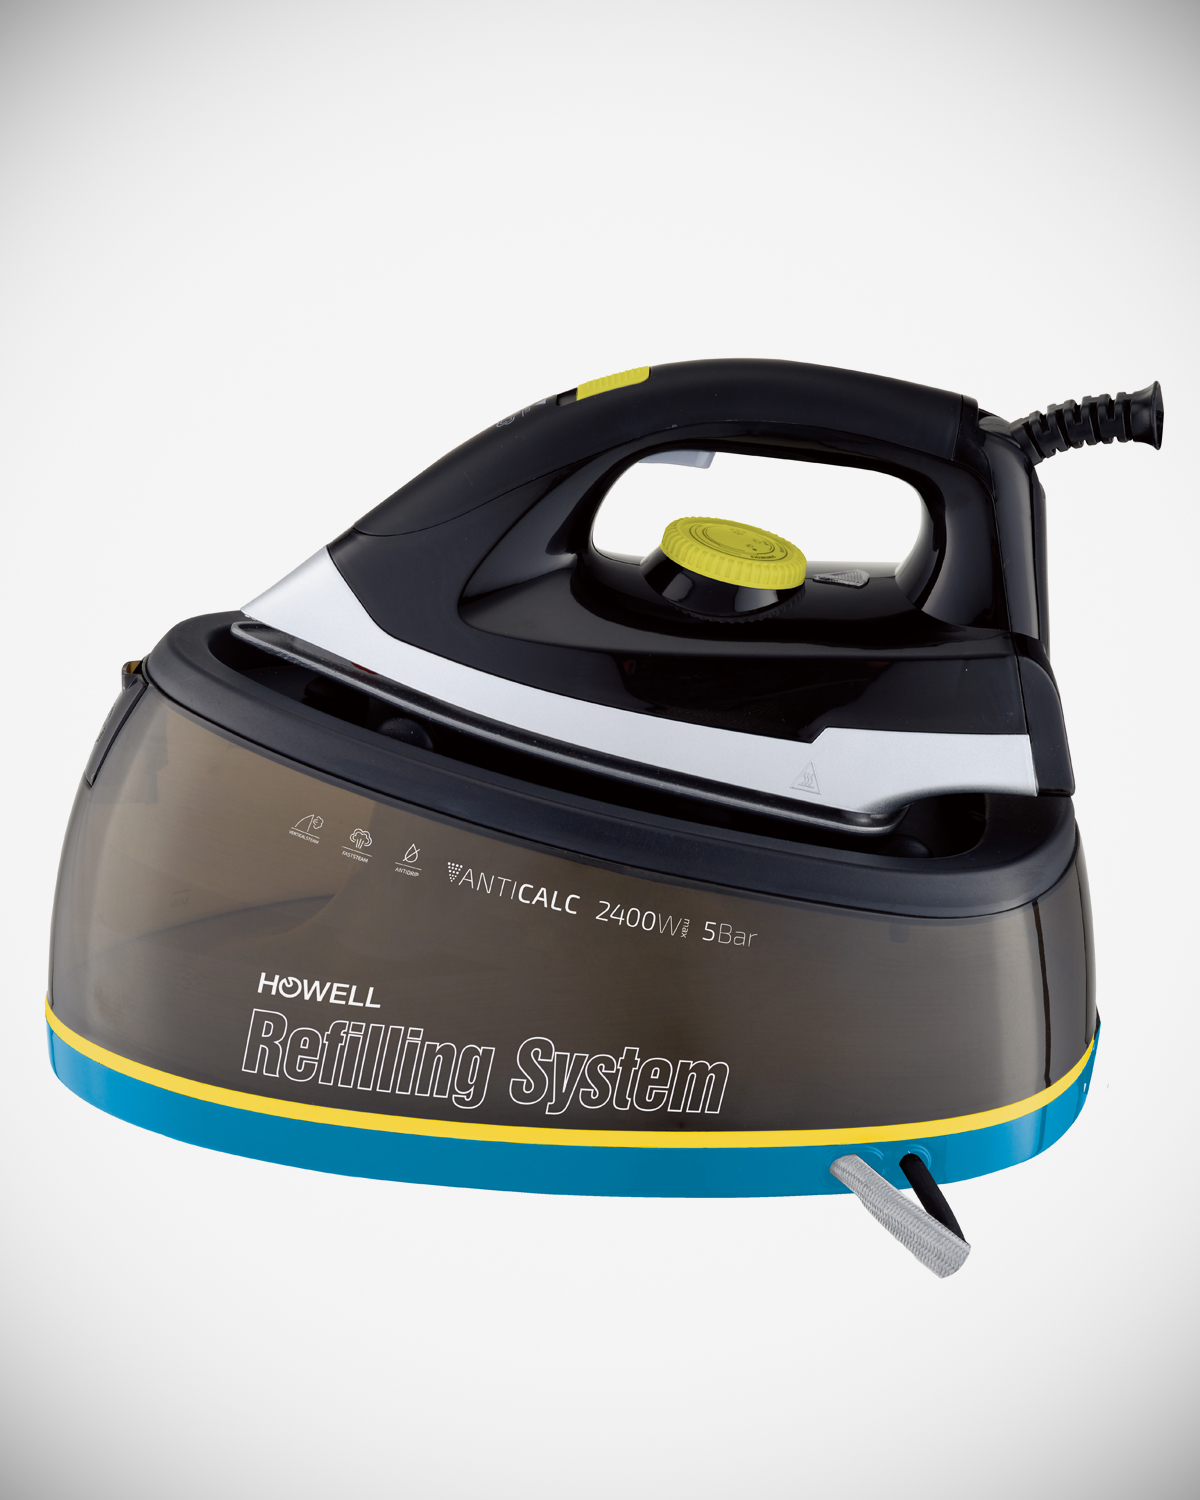 Steam station iron with water refilling system